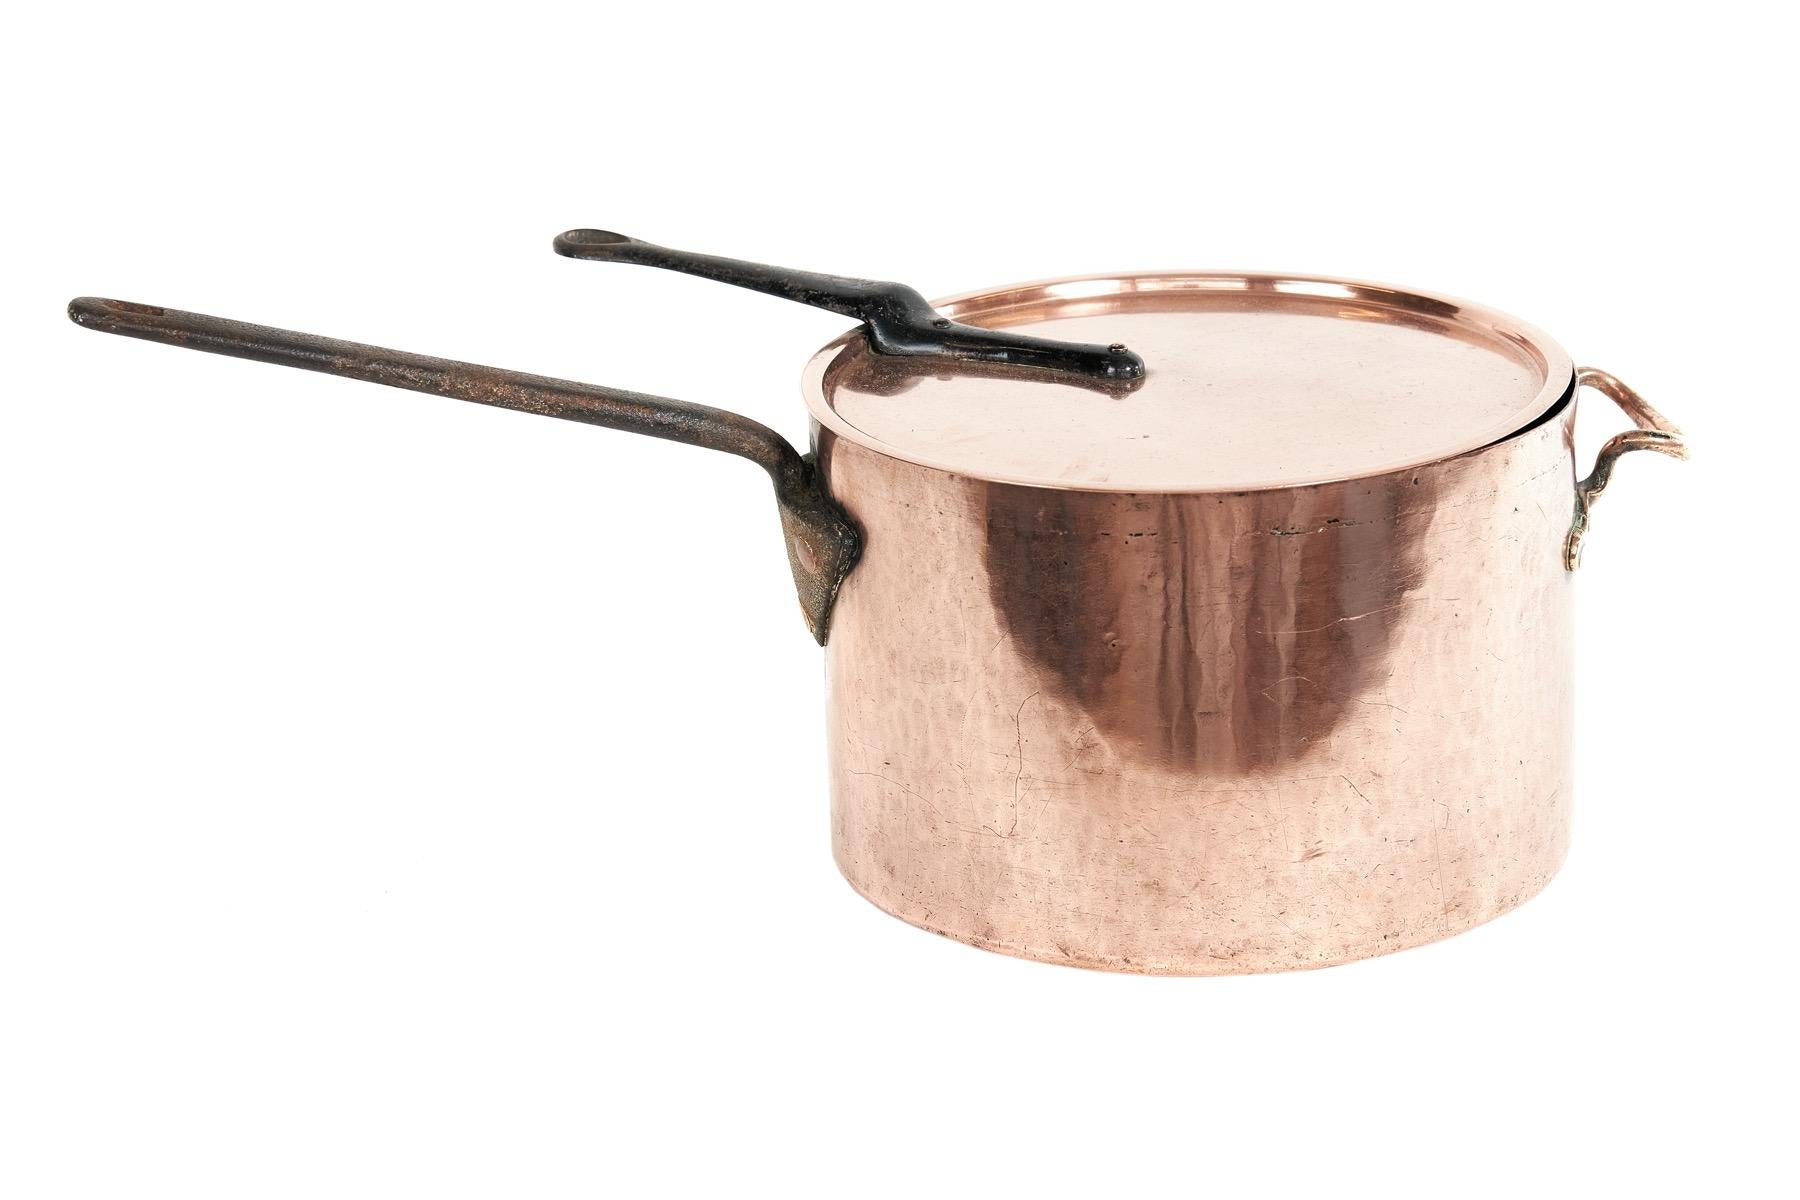 Large Georgian Copper Saucepan with Lid
Circular Dish top lid with Rivited Iron Handle.
Saucepan with cast brass handle rivited at front
Long Iron Handle Rivited at back,
back of saucepan showing Braize Seam
Dimensions : Saucepan Diameter :35cm
Very